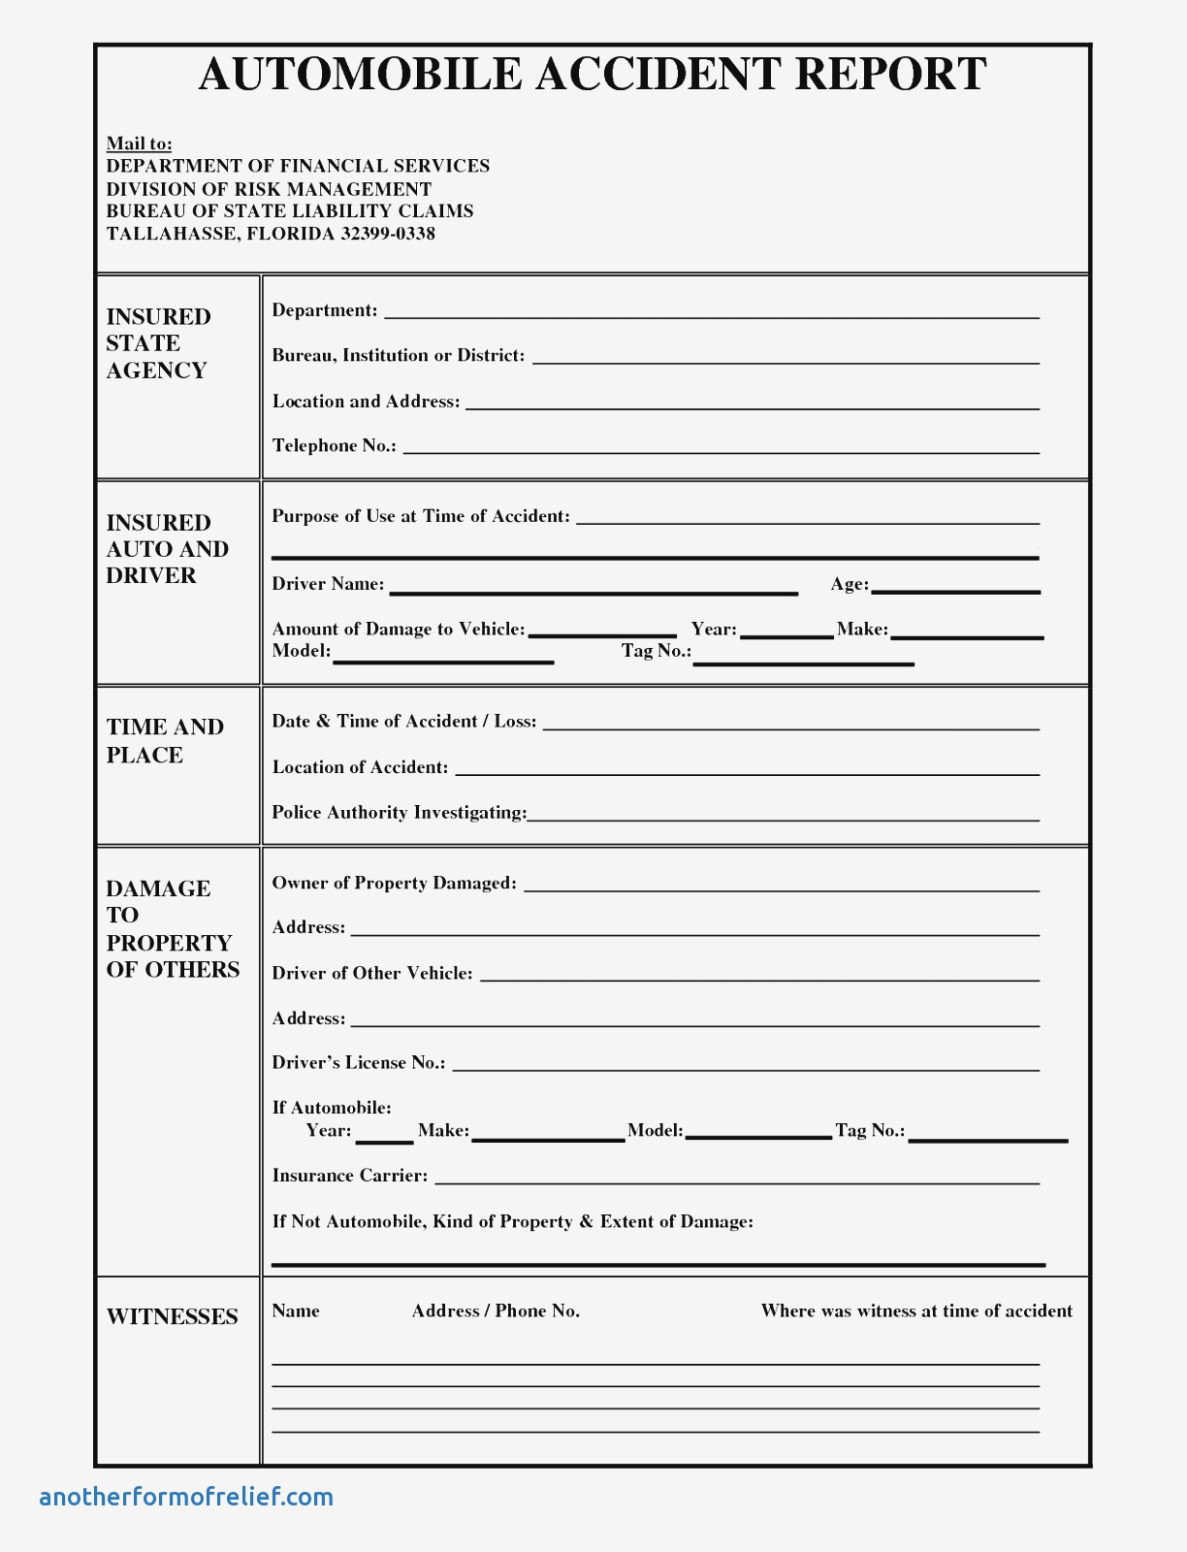 Auto Accident Report Form Income Tax Keep In Your Glove Box Pertaining To Vehicle Accident Report Template